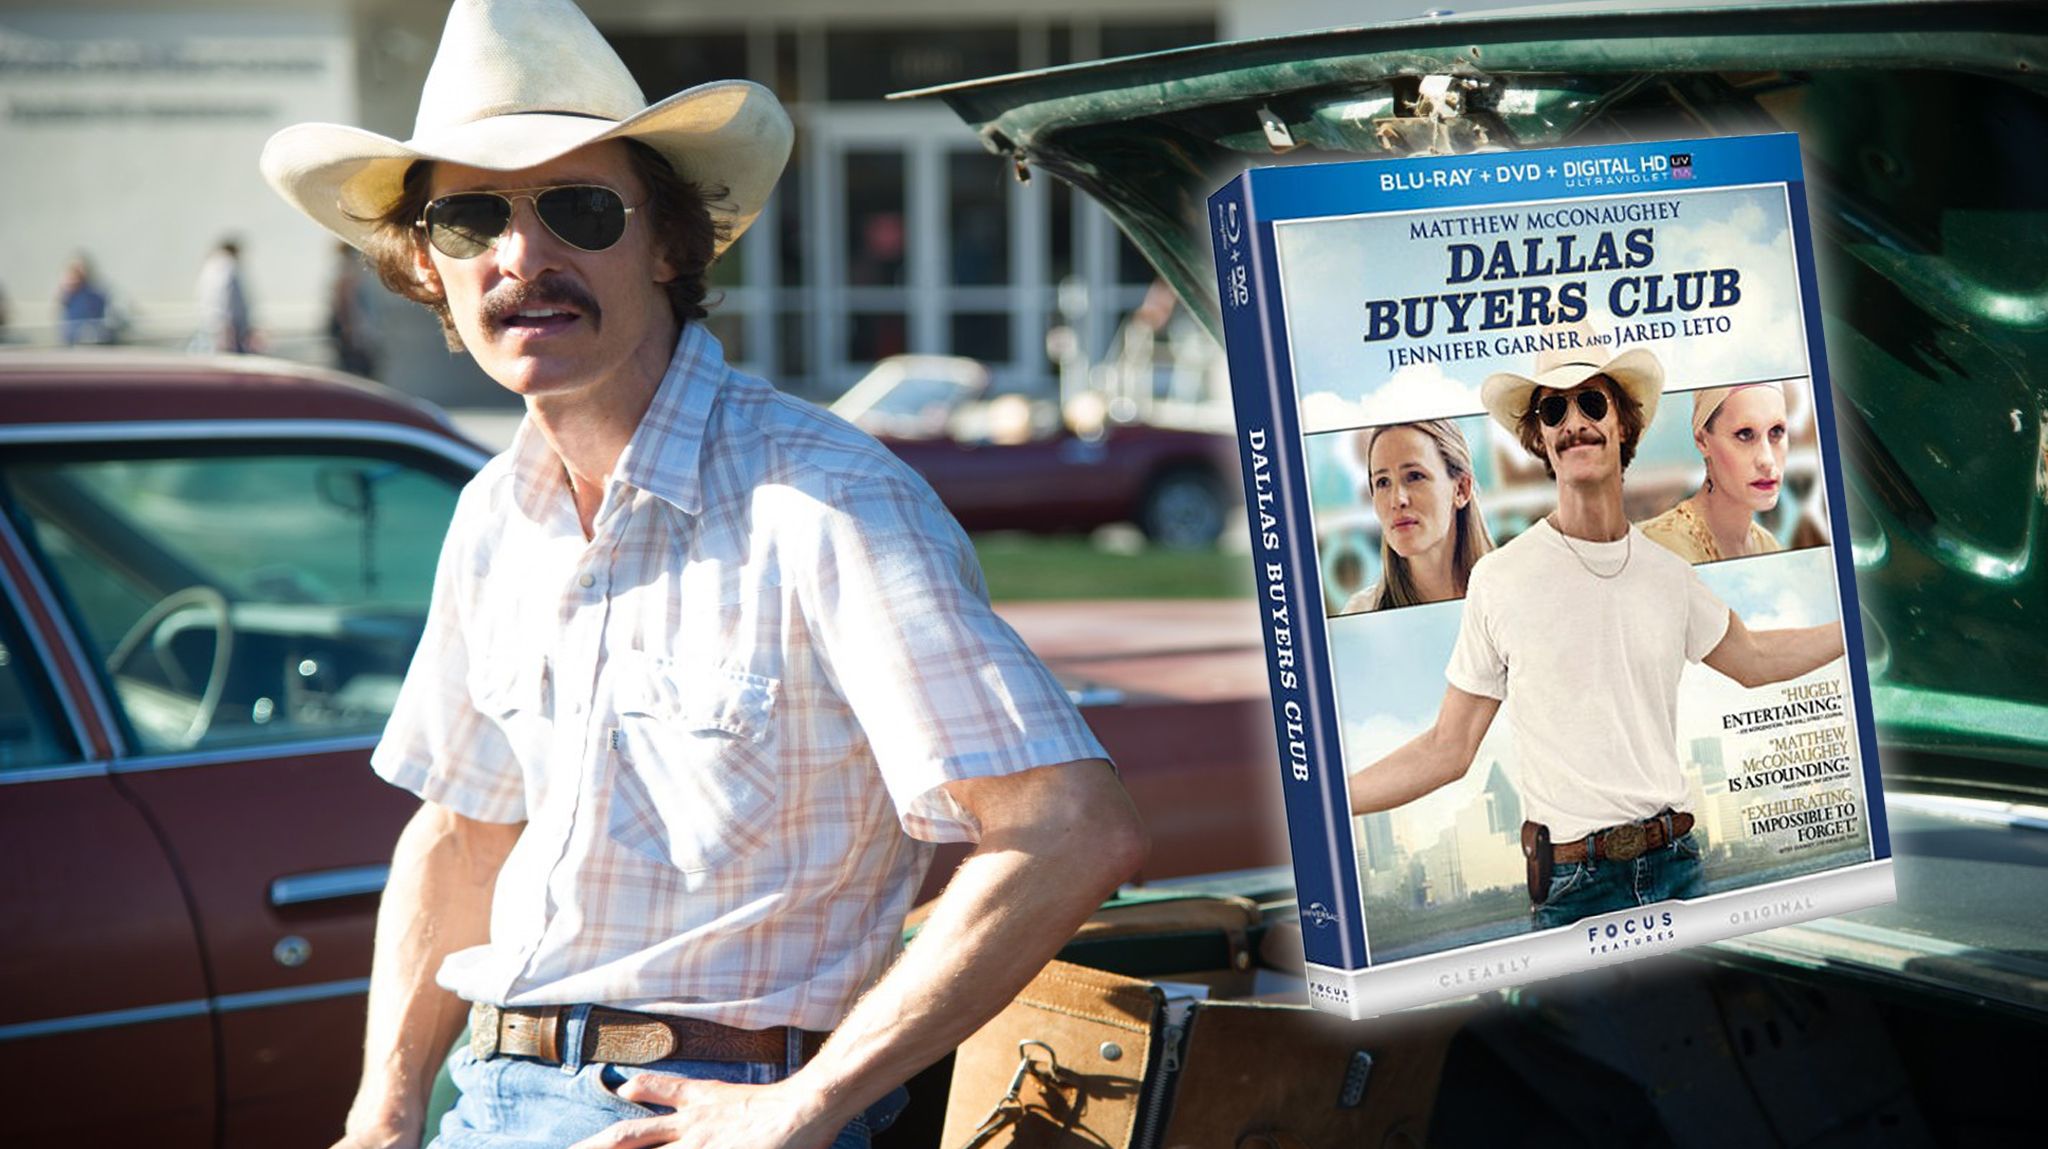 This Month On DVD: Dallas Buyers Club